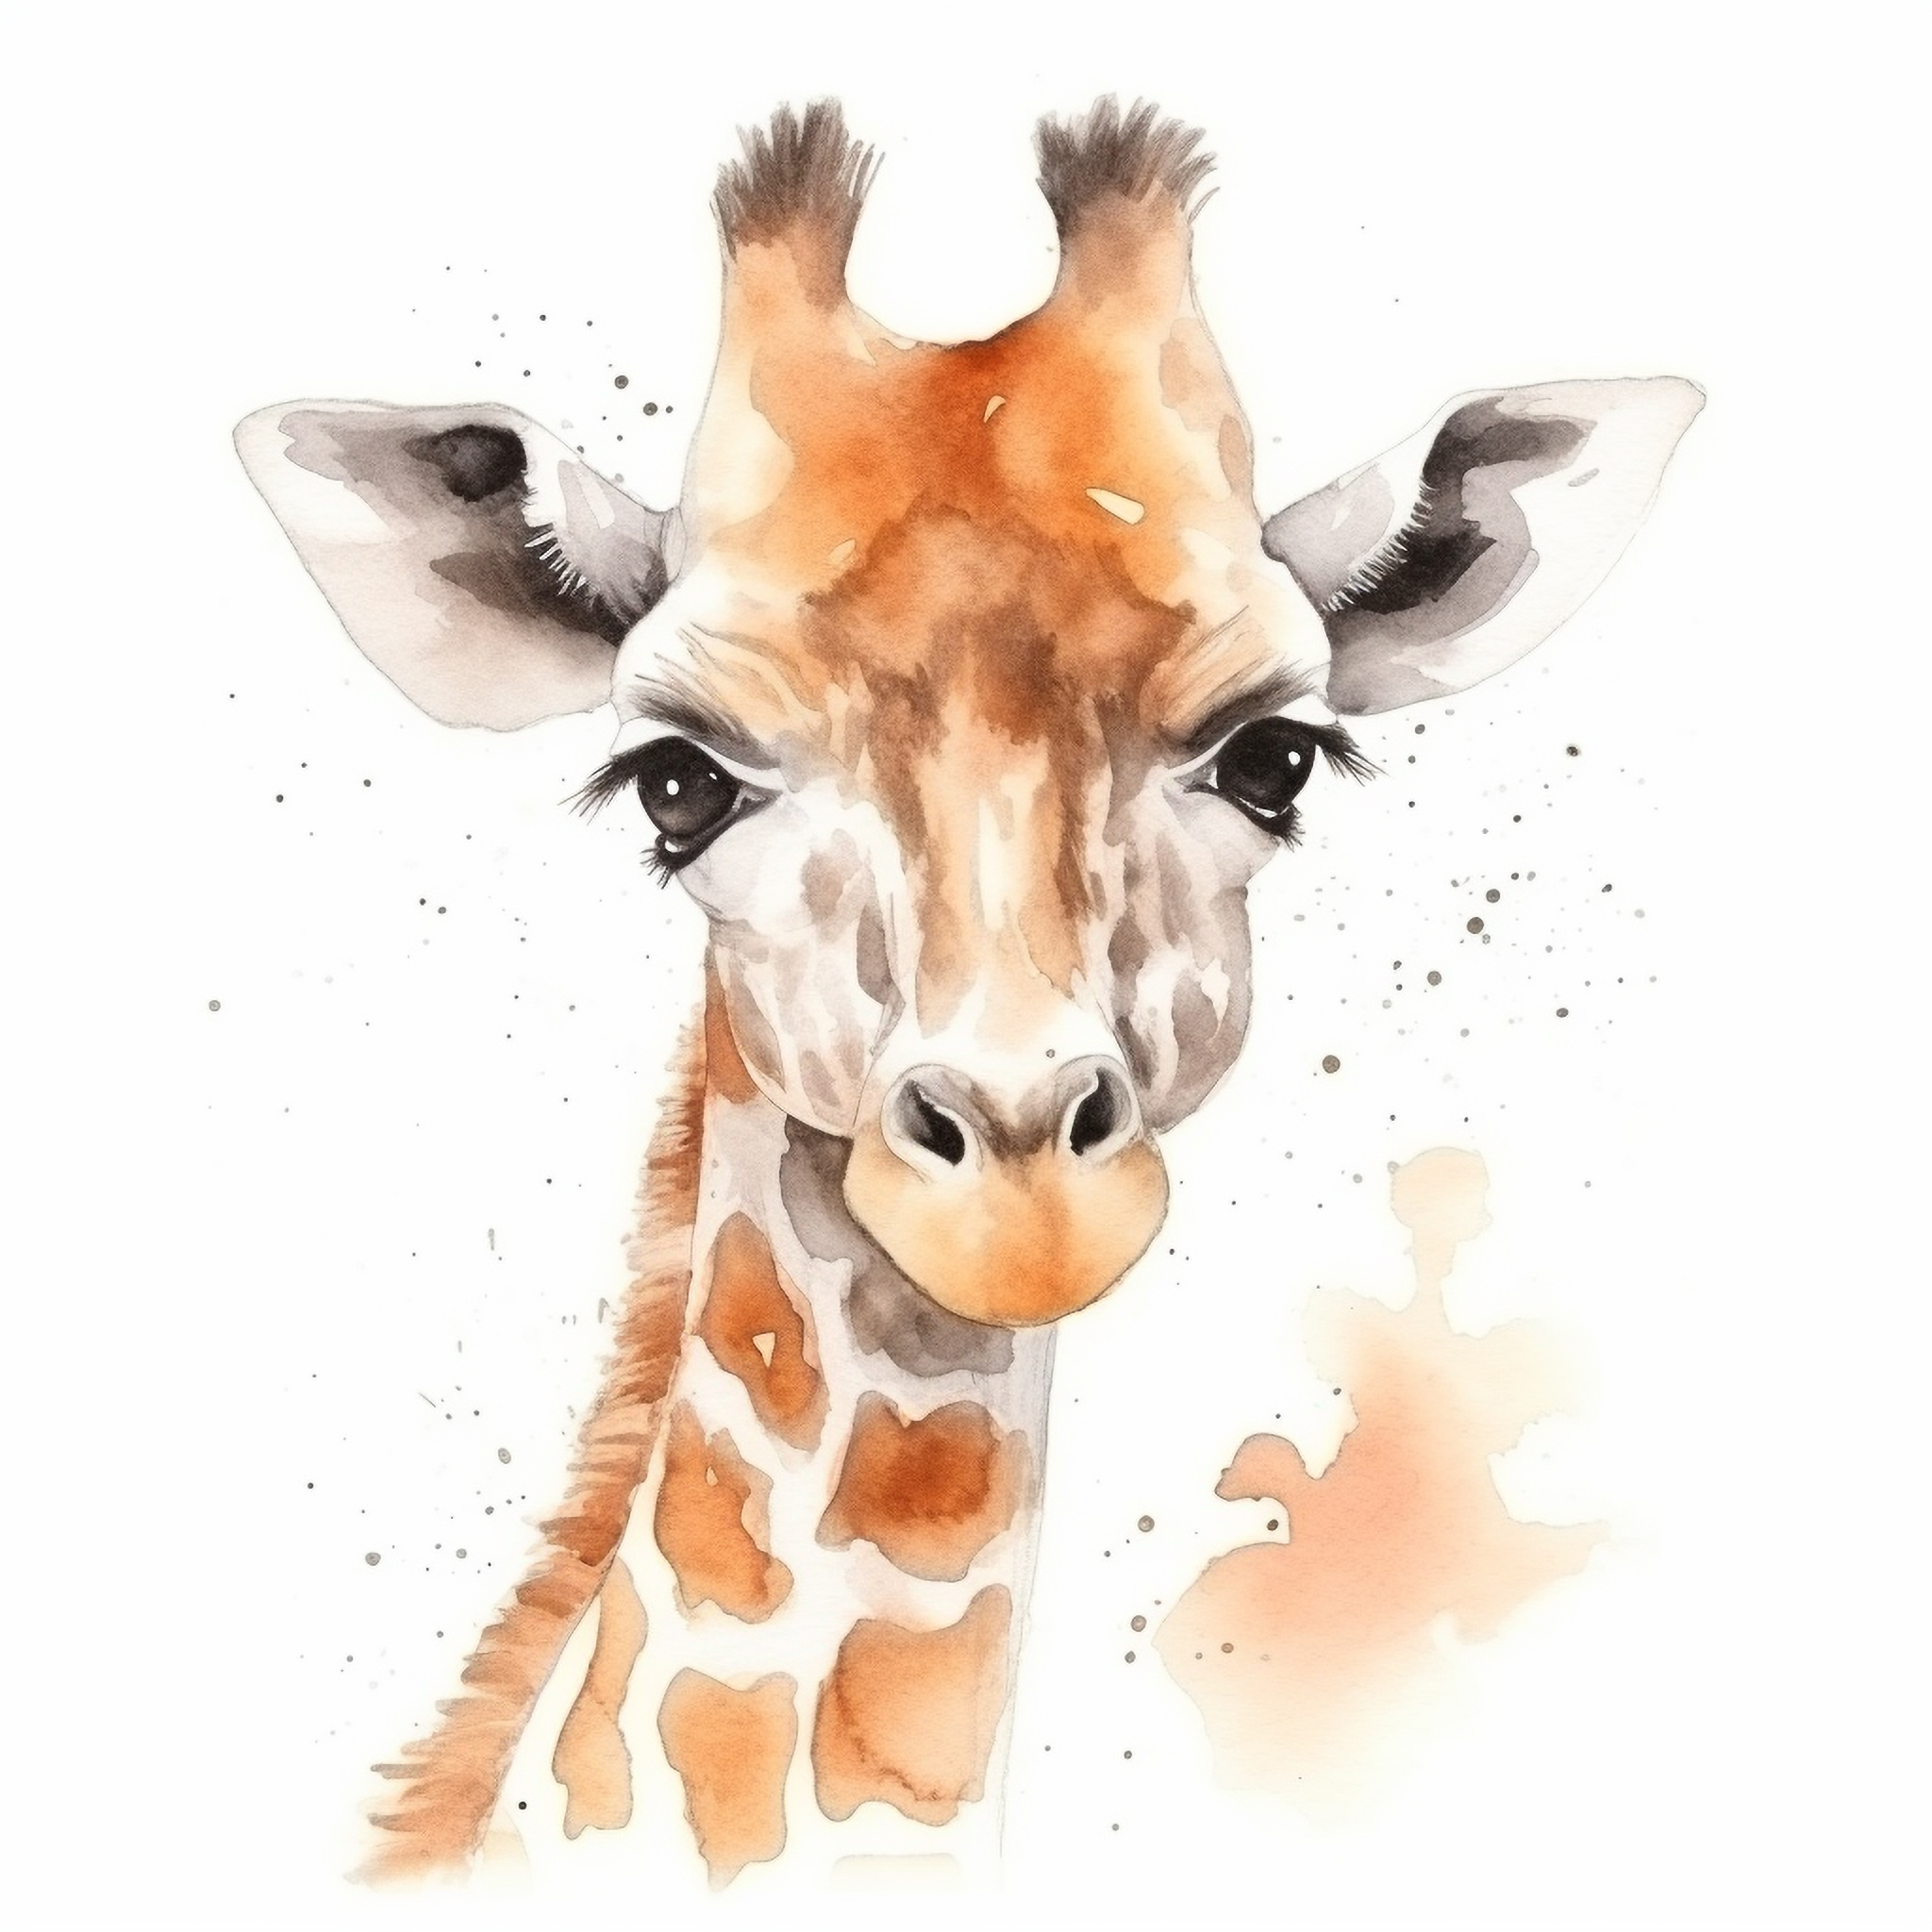 Watercolor_cute_giraffe_on_white_background_minimalis_9a78eaac-49d7-442d-bef2-2d14eb2dcbcc